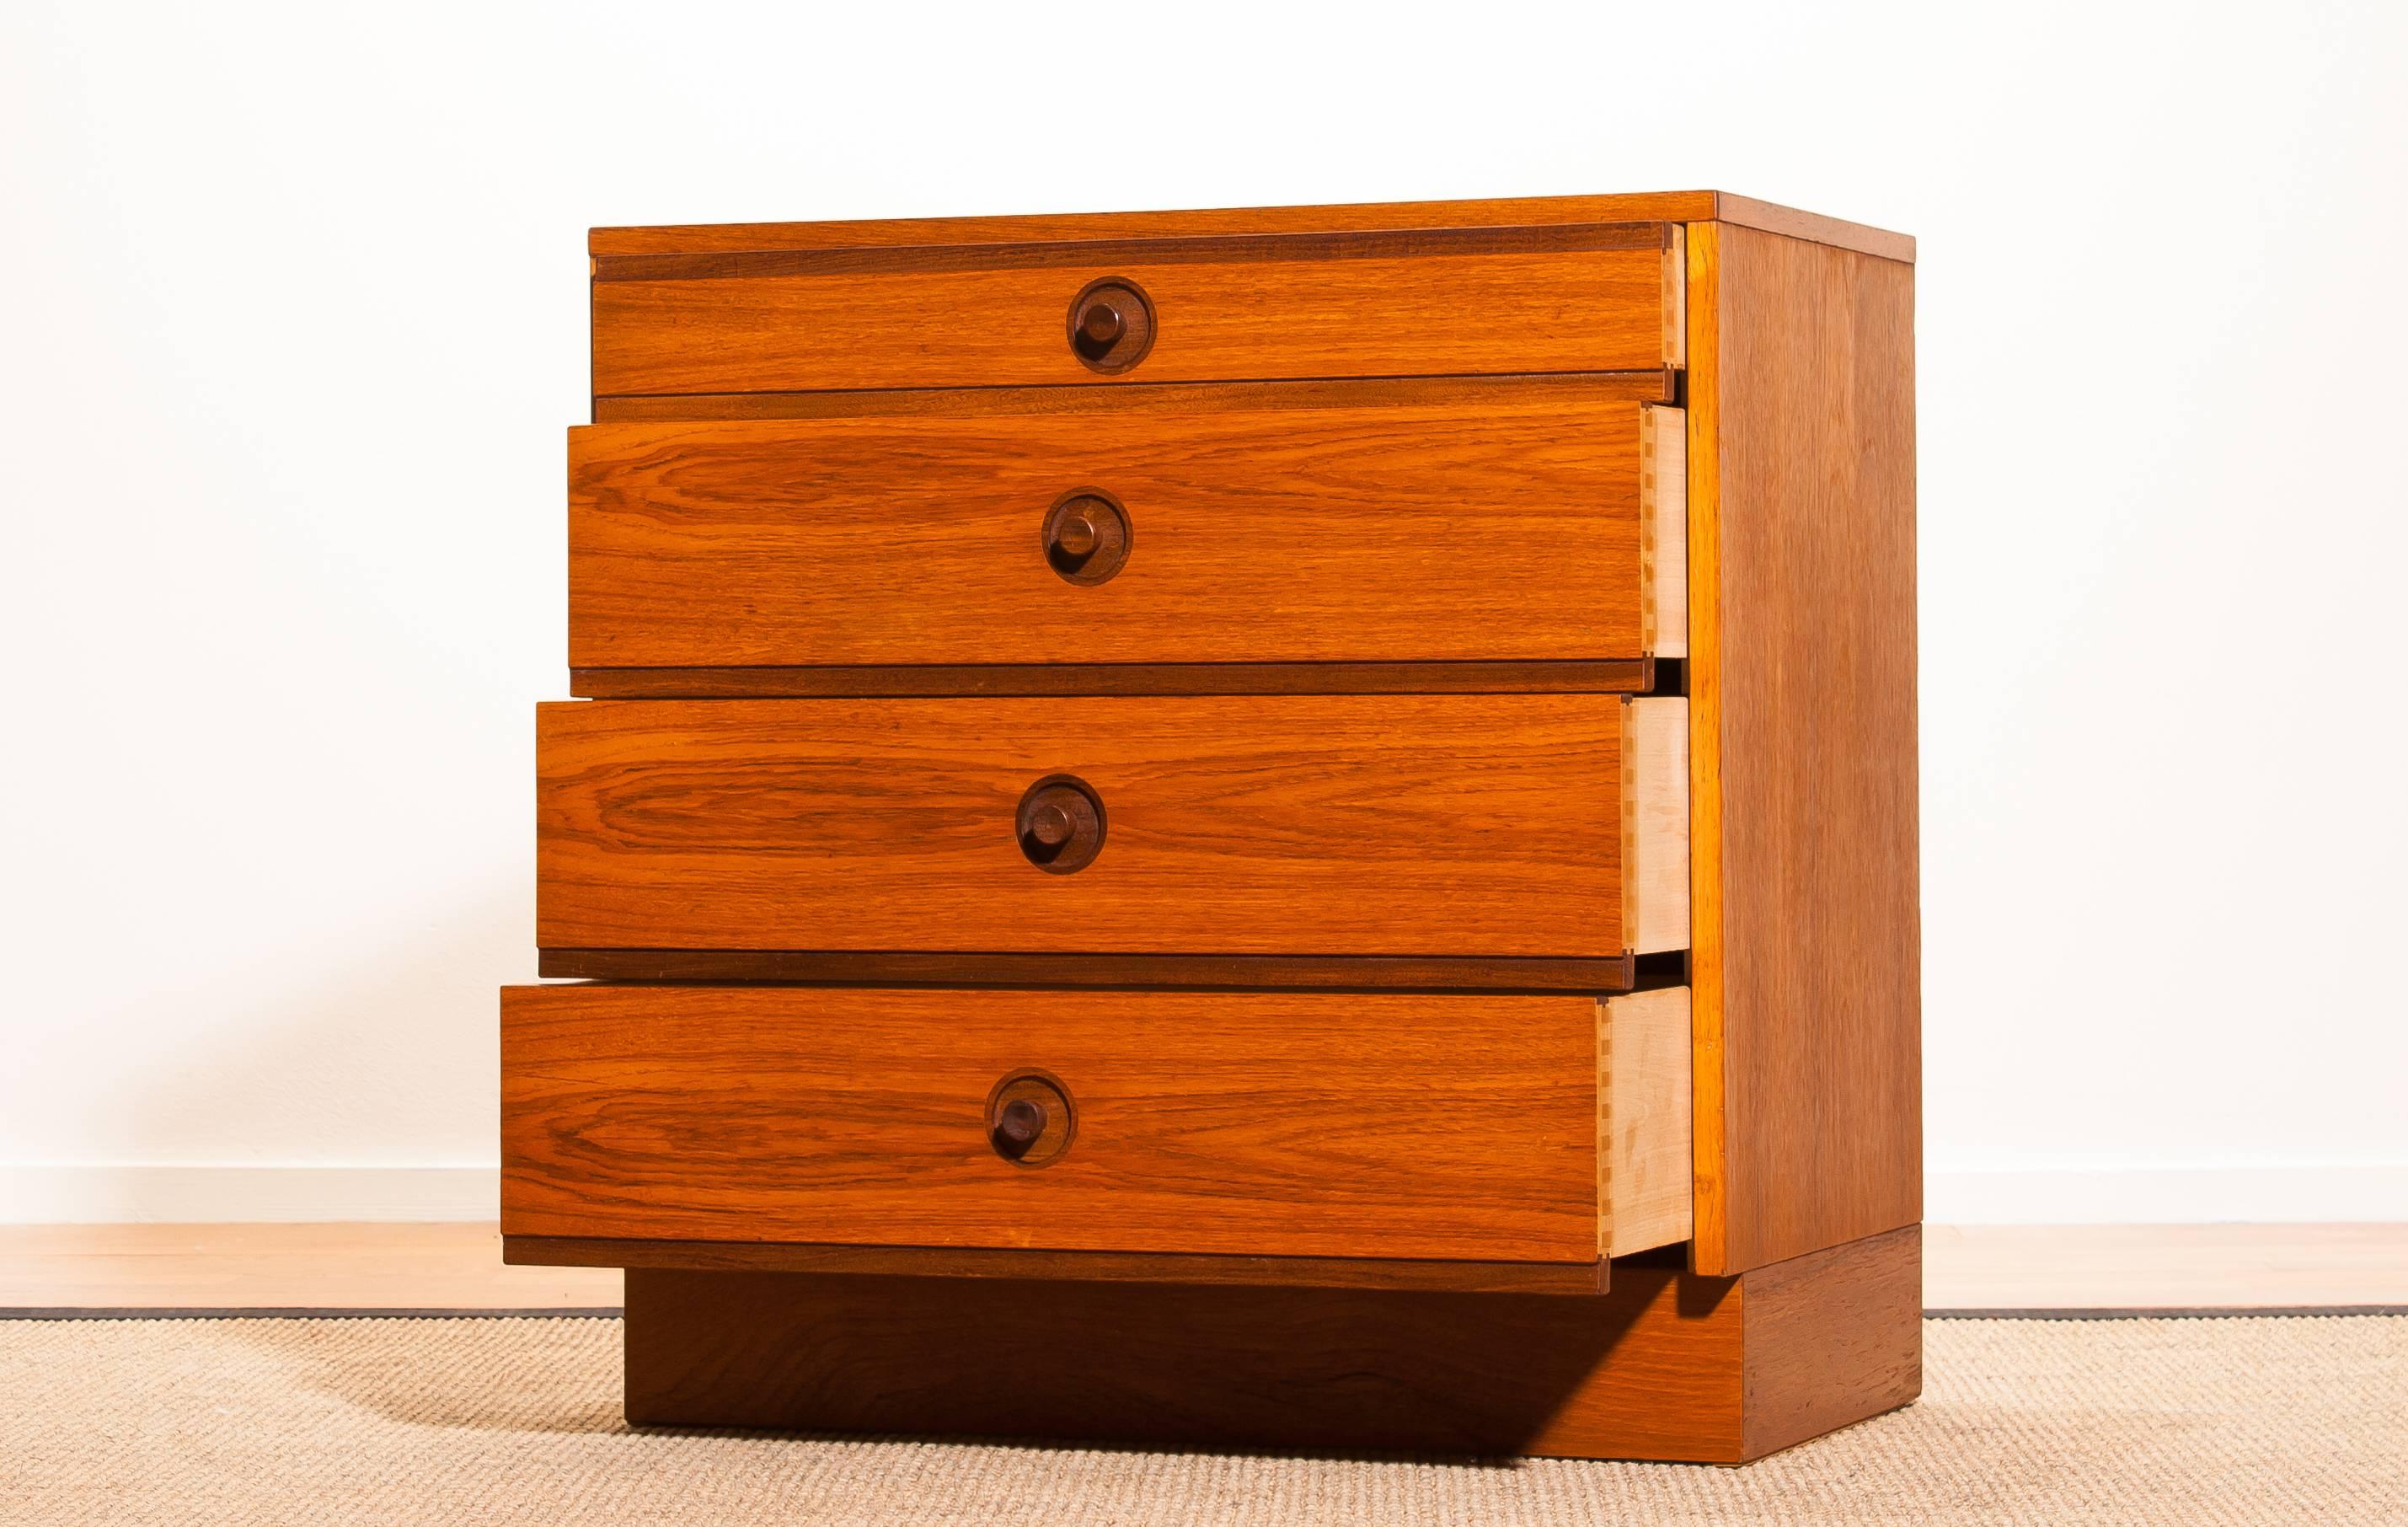 Very nice chest of drawers by Børge Mogensen for Karl Andersson & Söner Denmark.
This cabinet is made of teak and has four drawers.
It is in a beautiful condition.
Period 1950s.
Dimensions: H 68 cm, W 66 cm, D 40 cm.